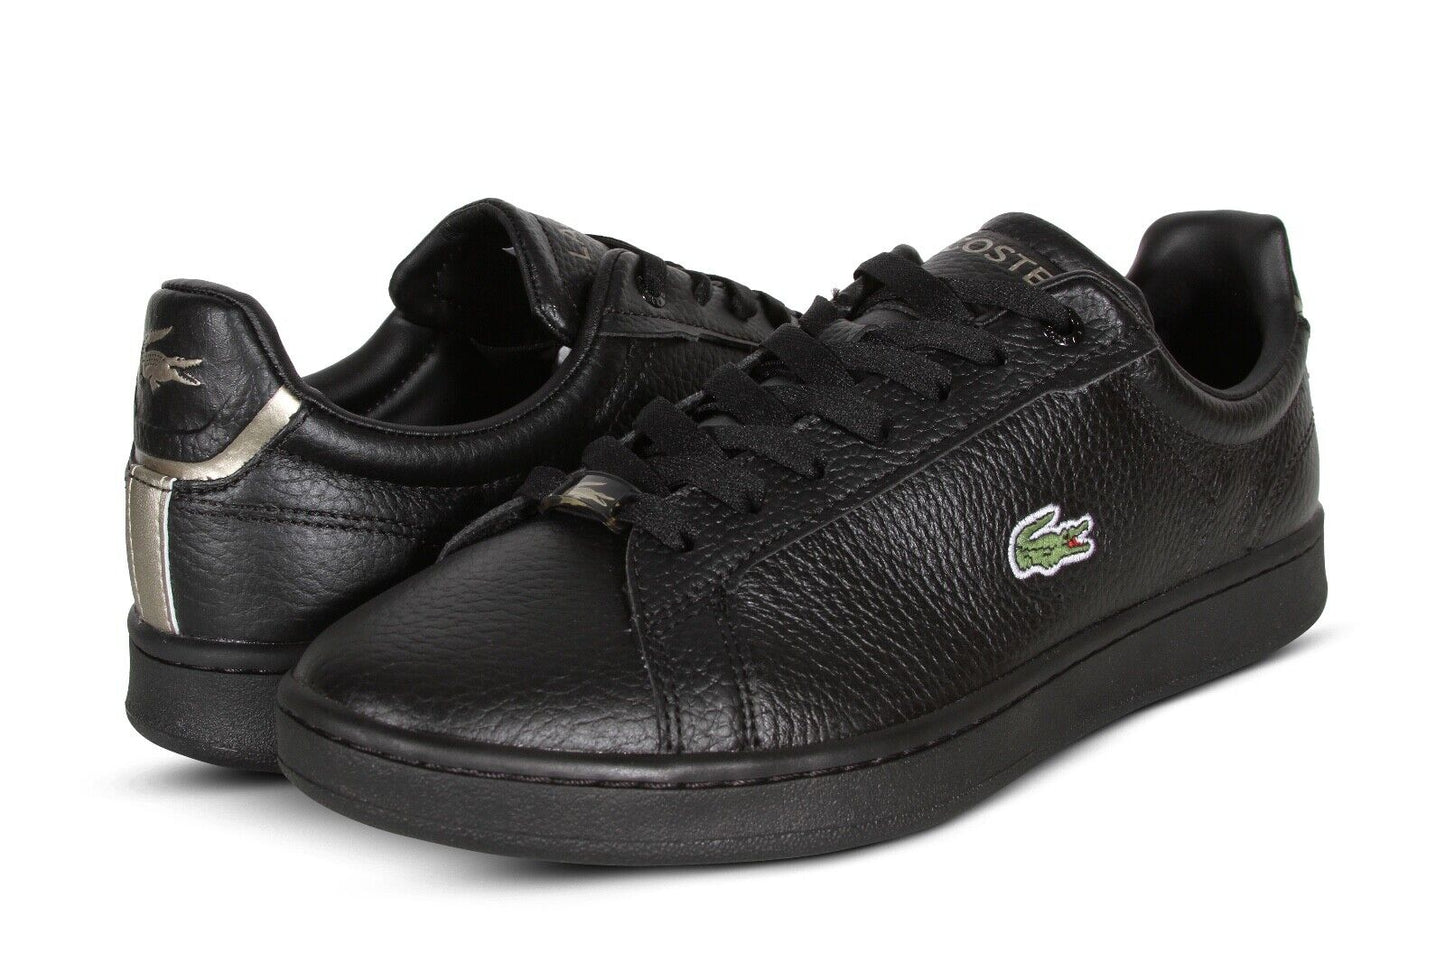 Lacoste Carnaby Pro 123 3 SMA Men's Sneakers in Black 745SMA011302H